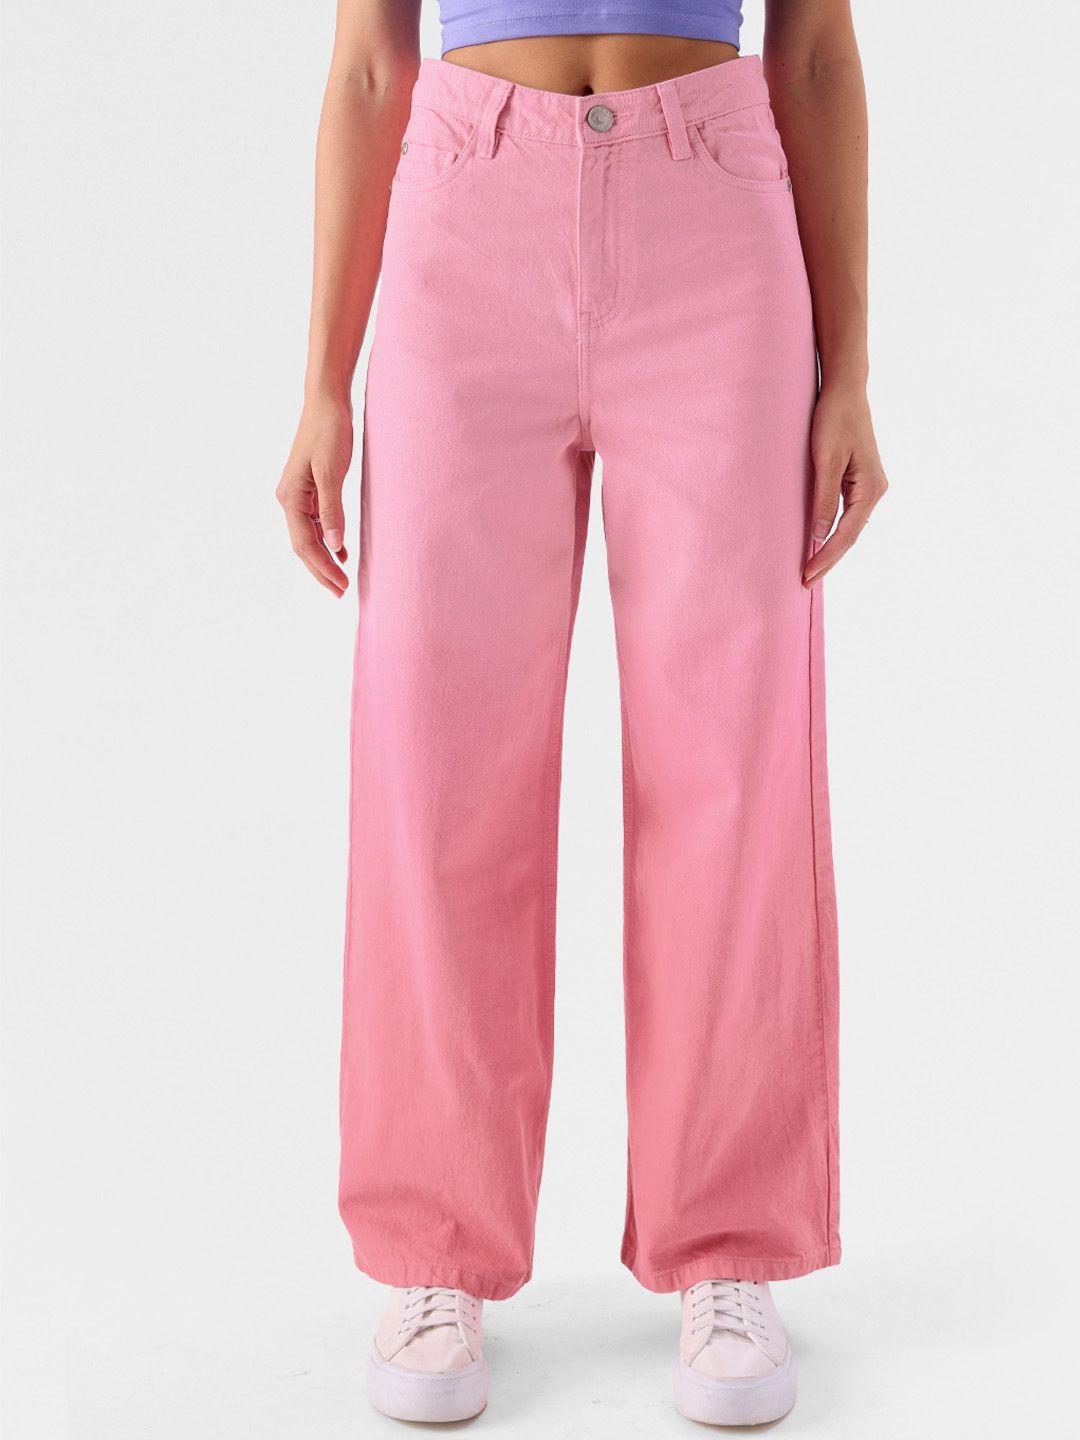 the souled store women peach-coloured wide leg stretchable jeans